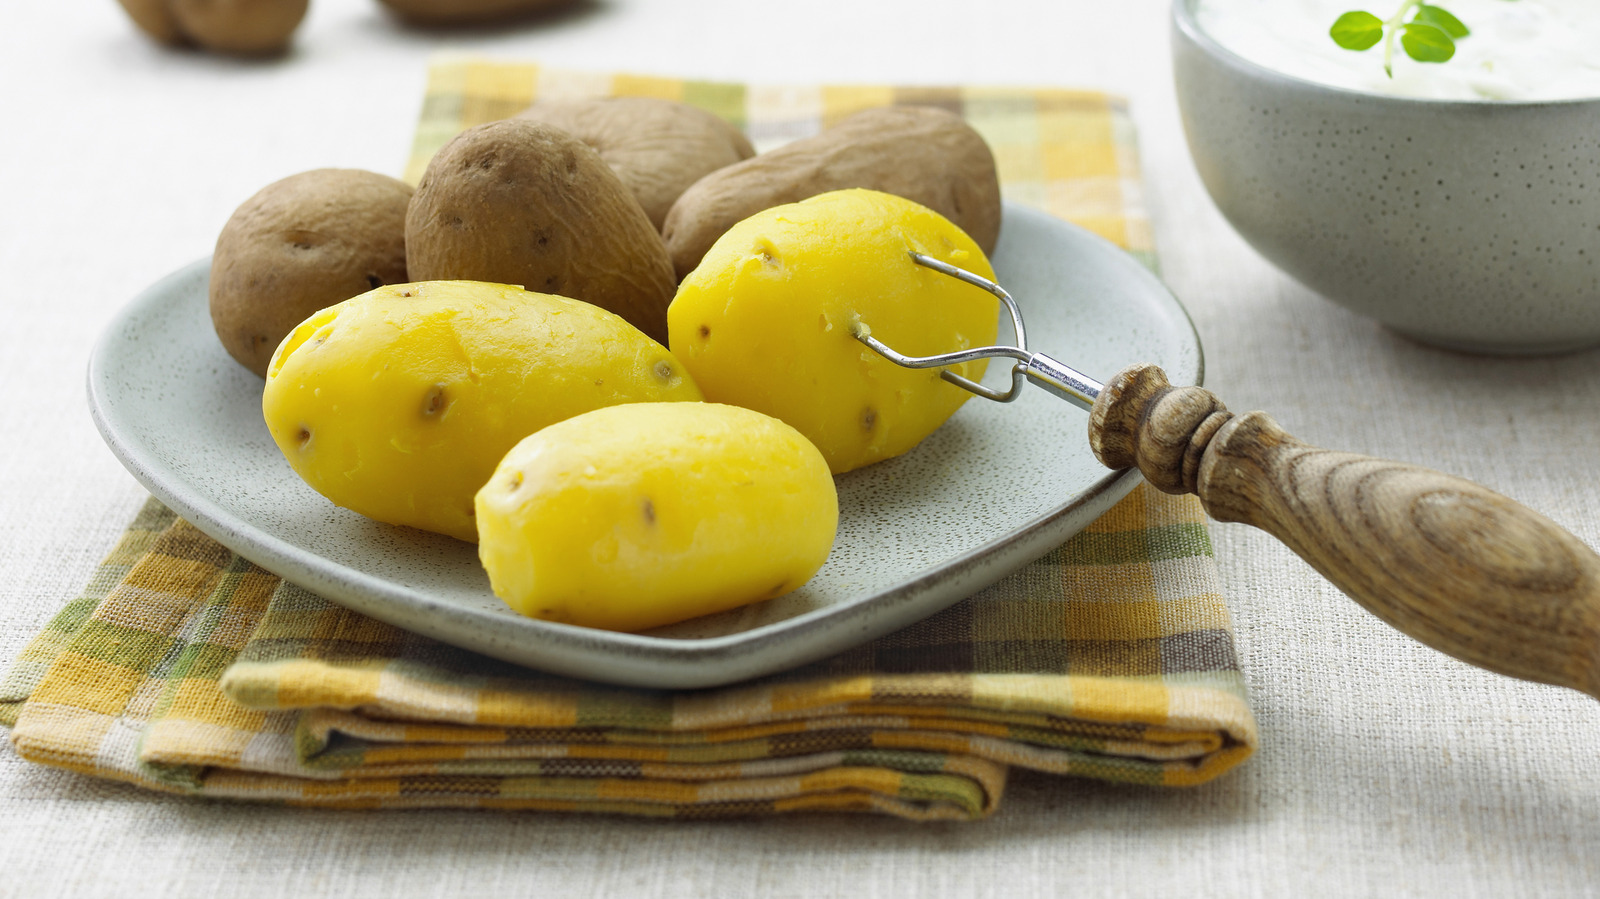 Why Vinegar Could Stop Your Potatoes From Softening